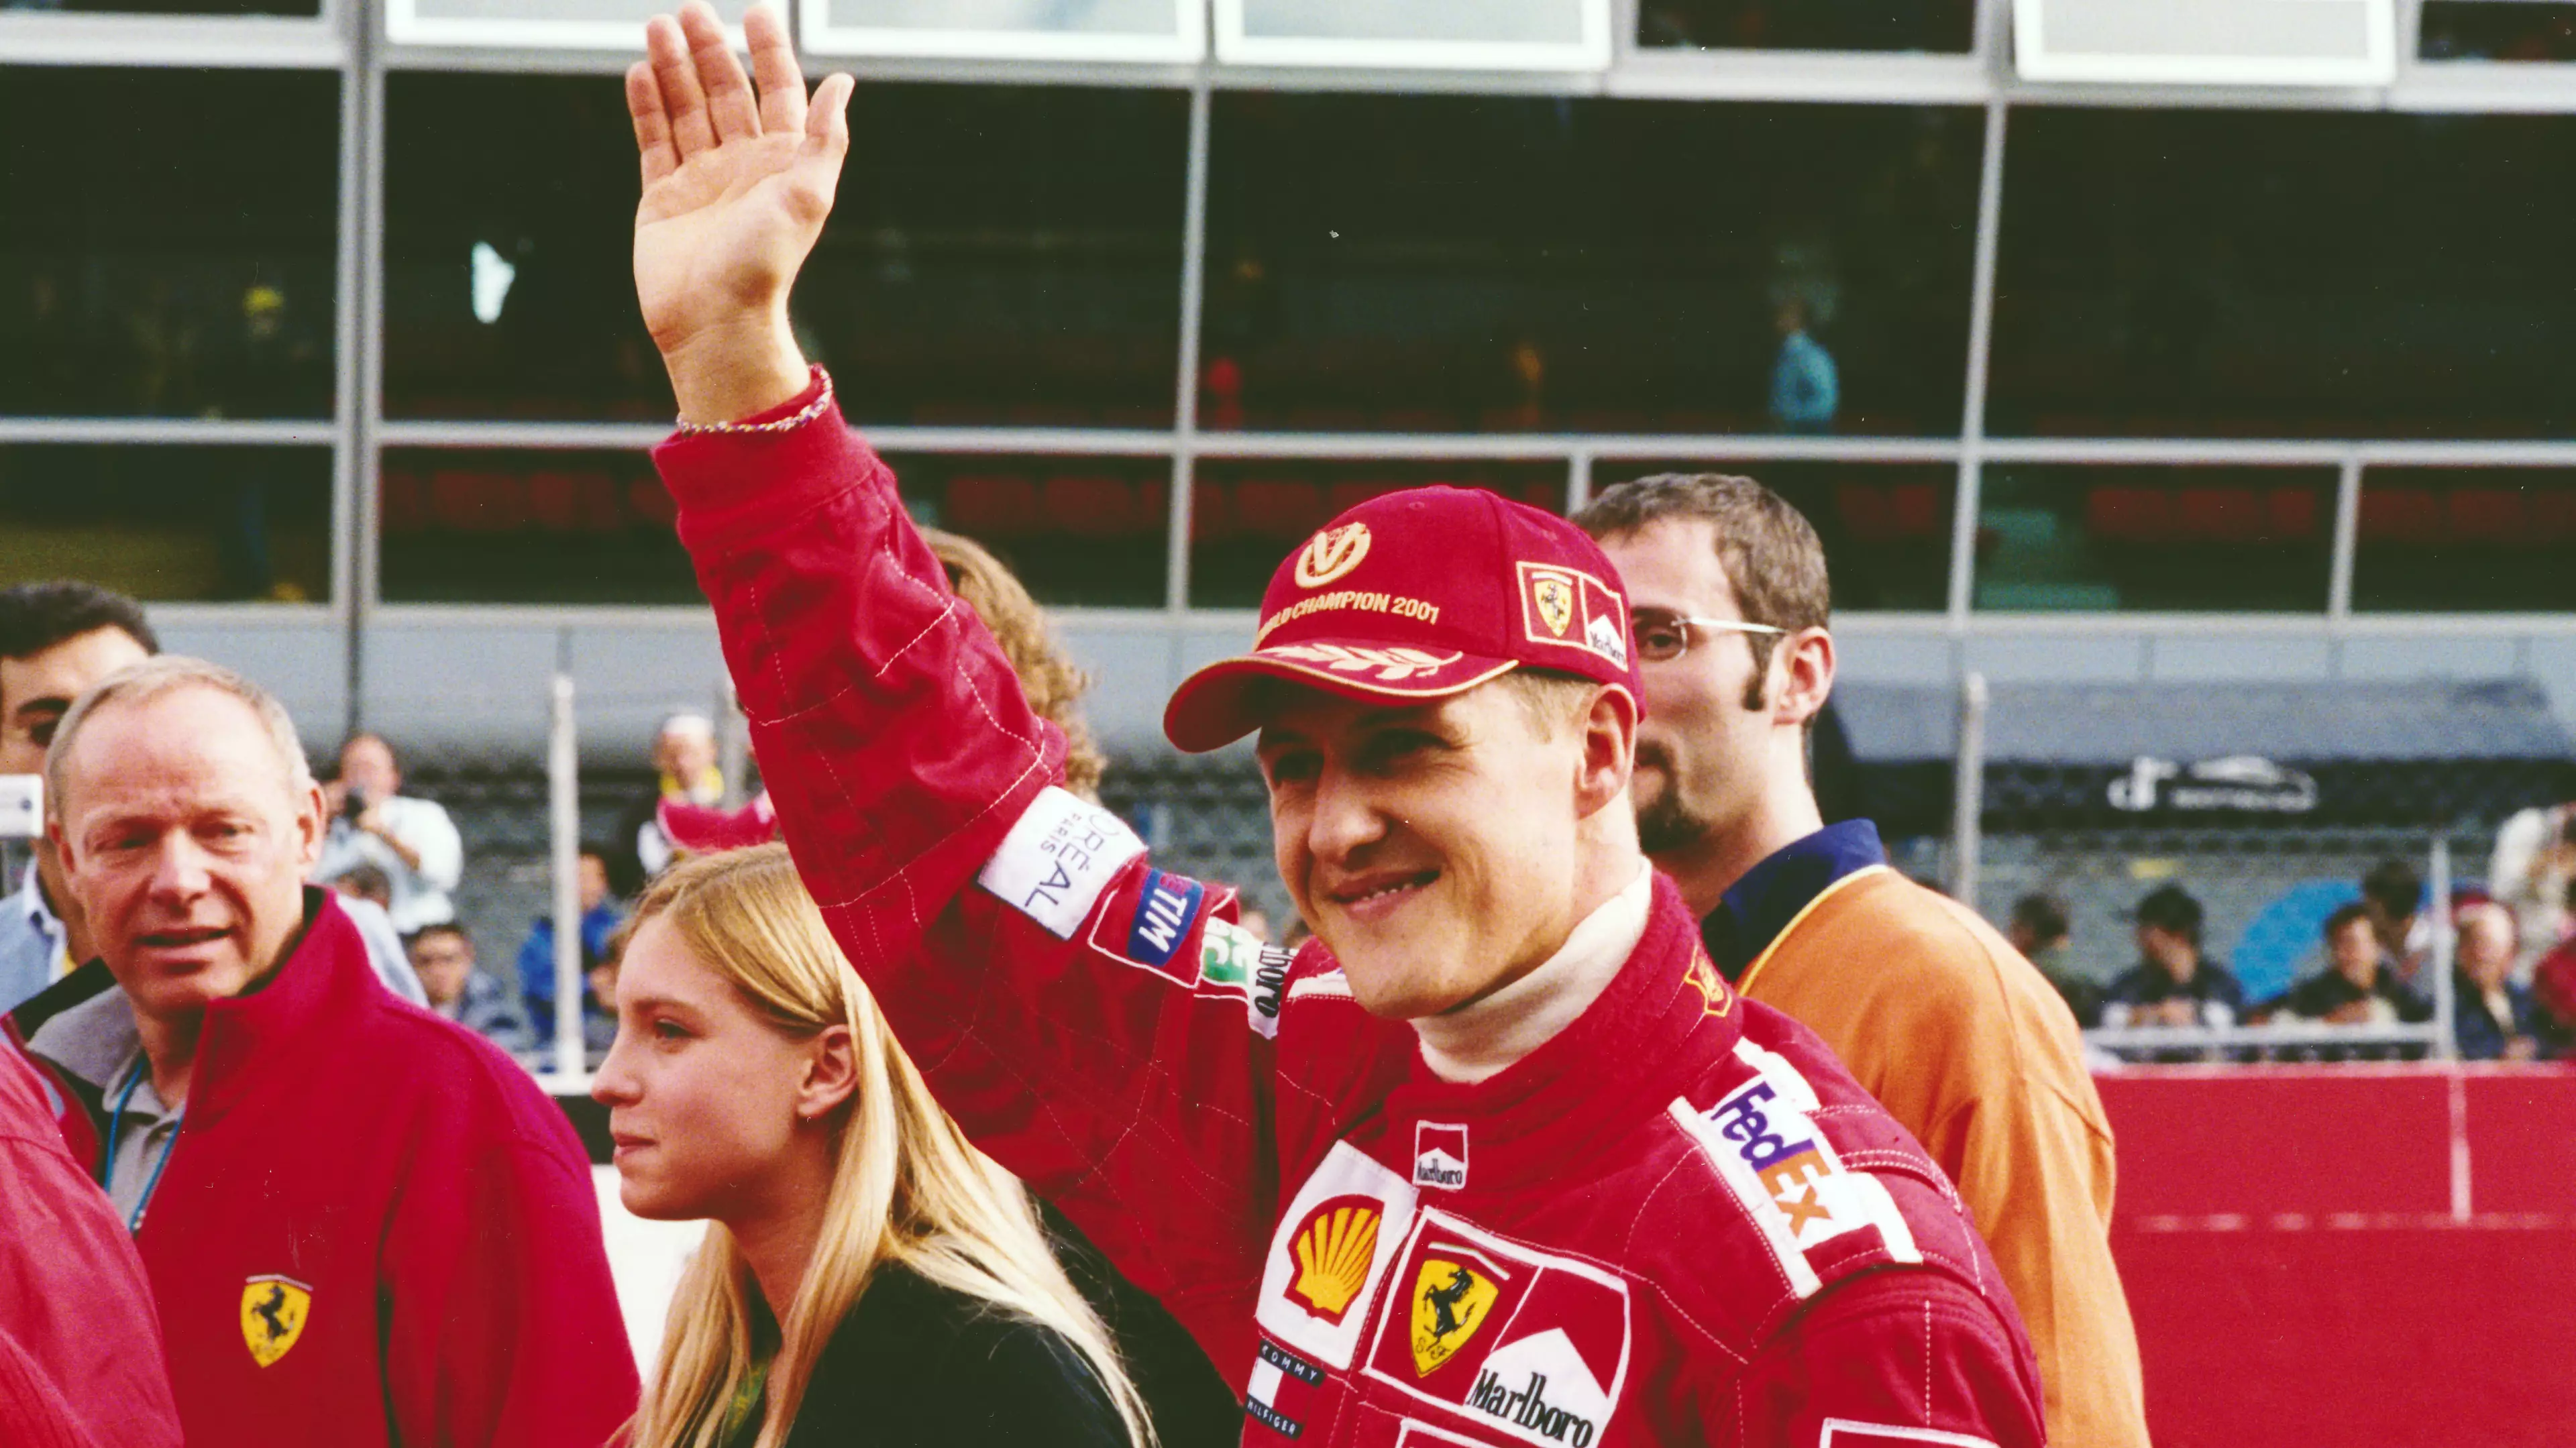 Michael Schumacher Documentary To Be Released Later This Year